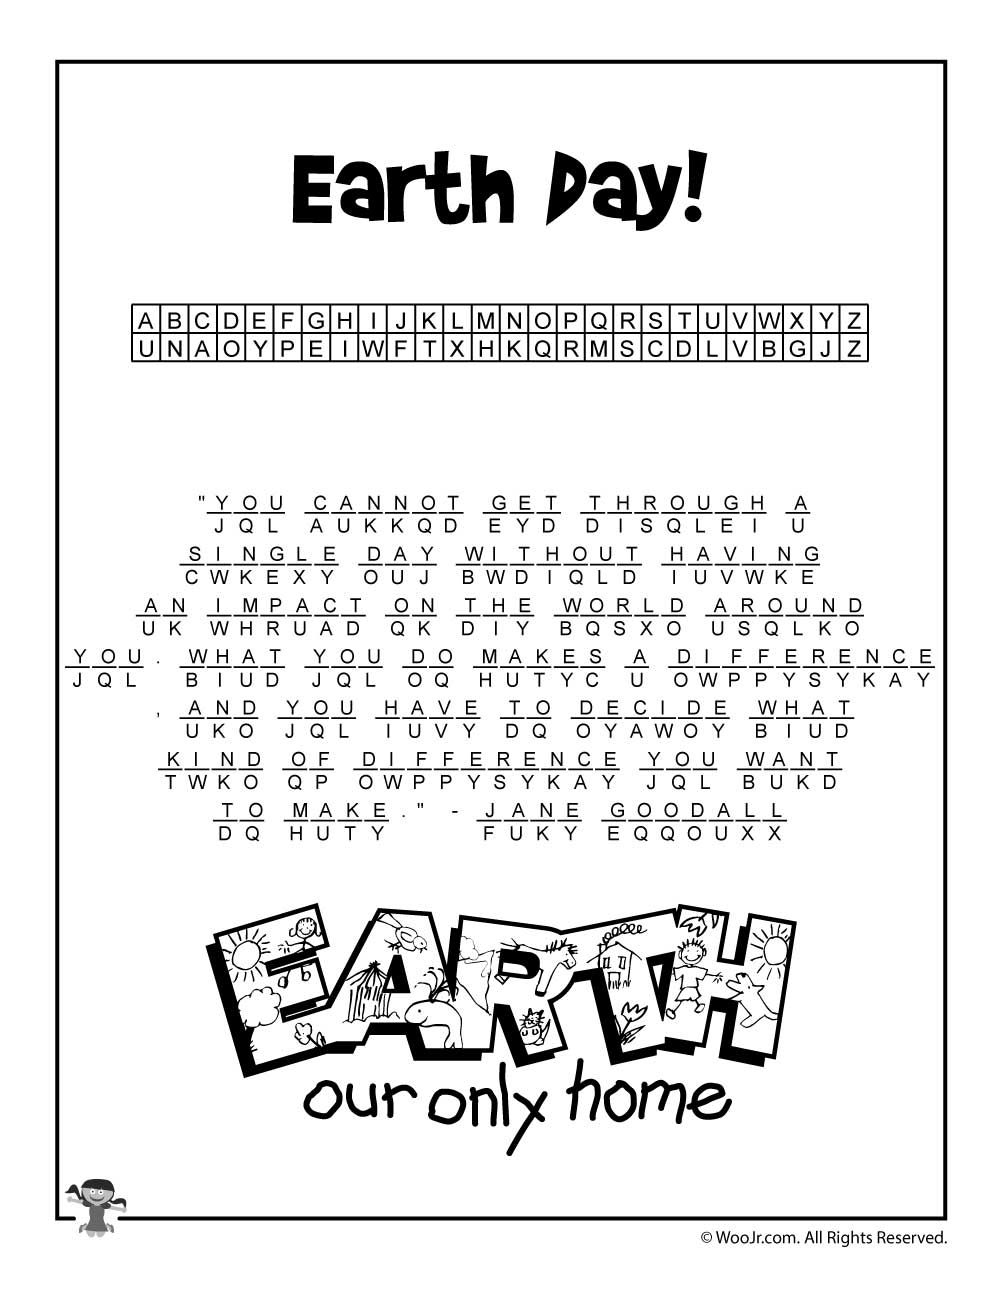 Earth Day Cryptogram Puzzle Solution | Class Decorations | Earth Day - Printable Puzzles Cryptograms